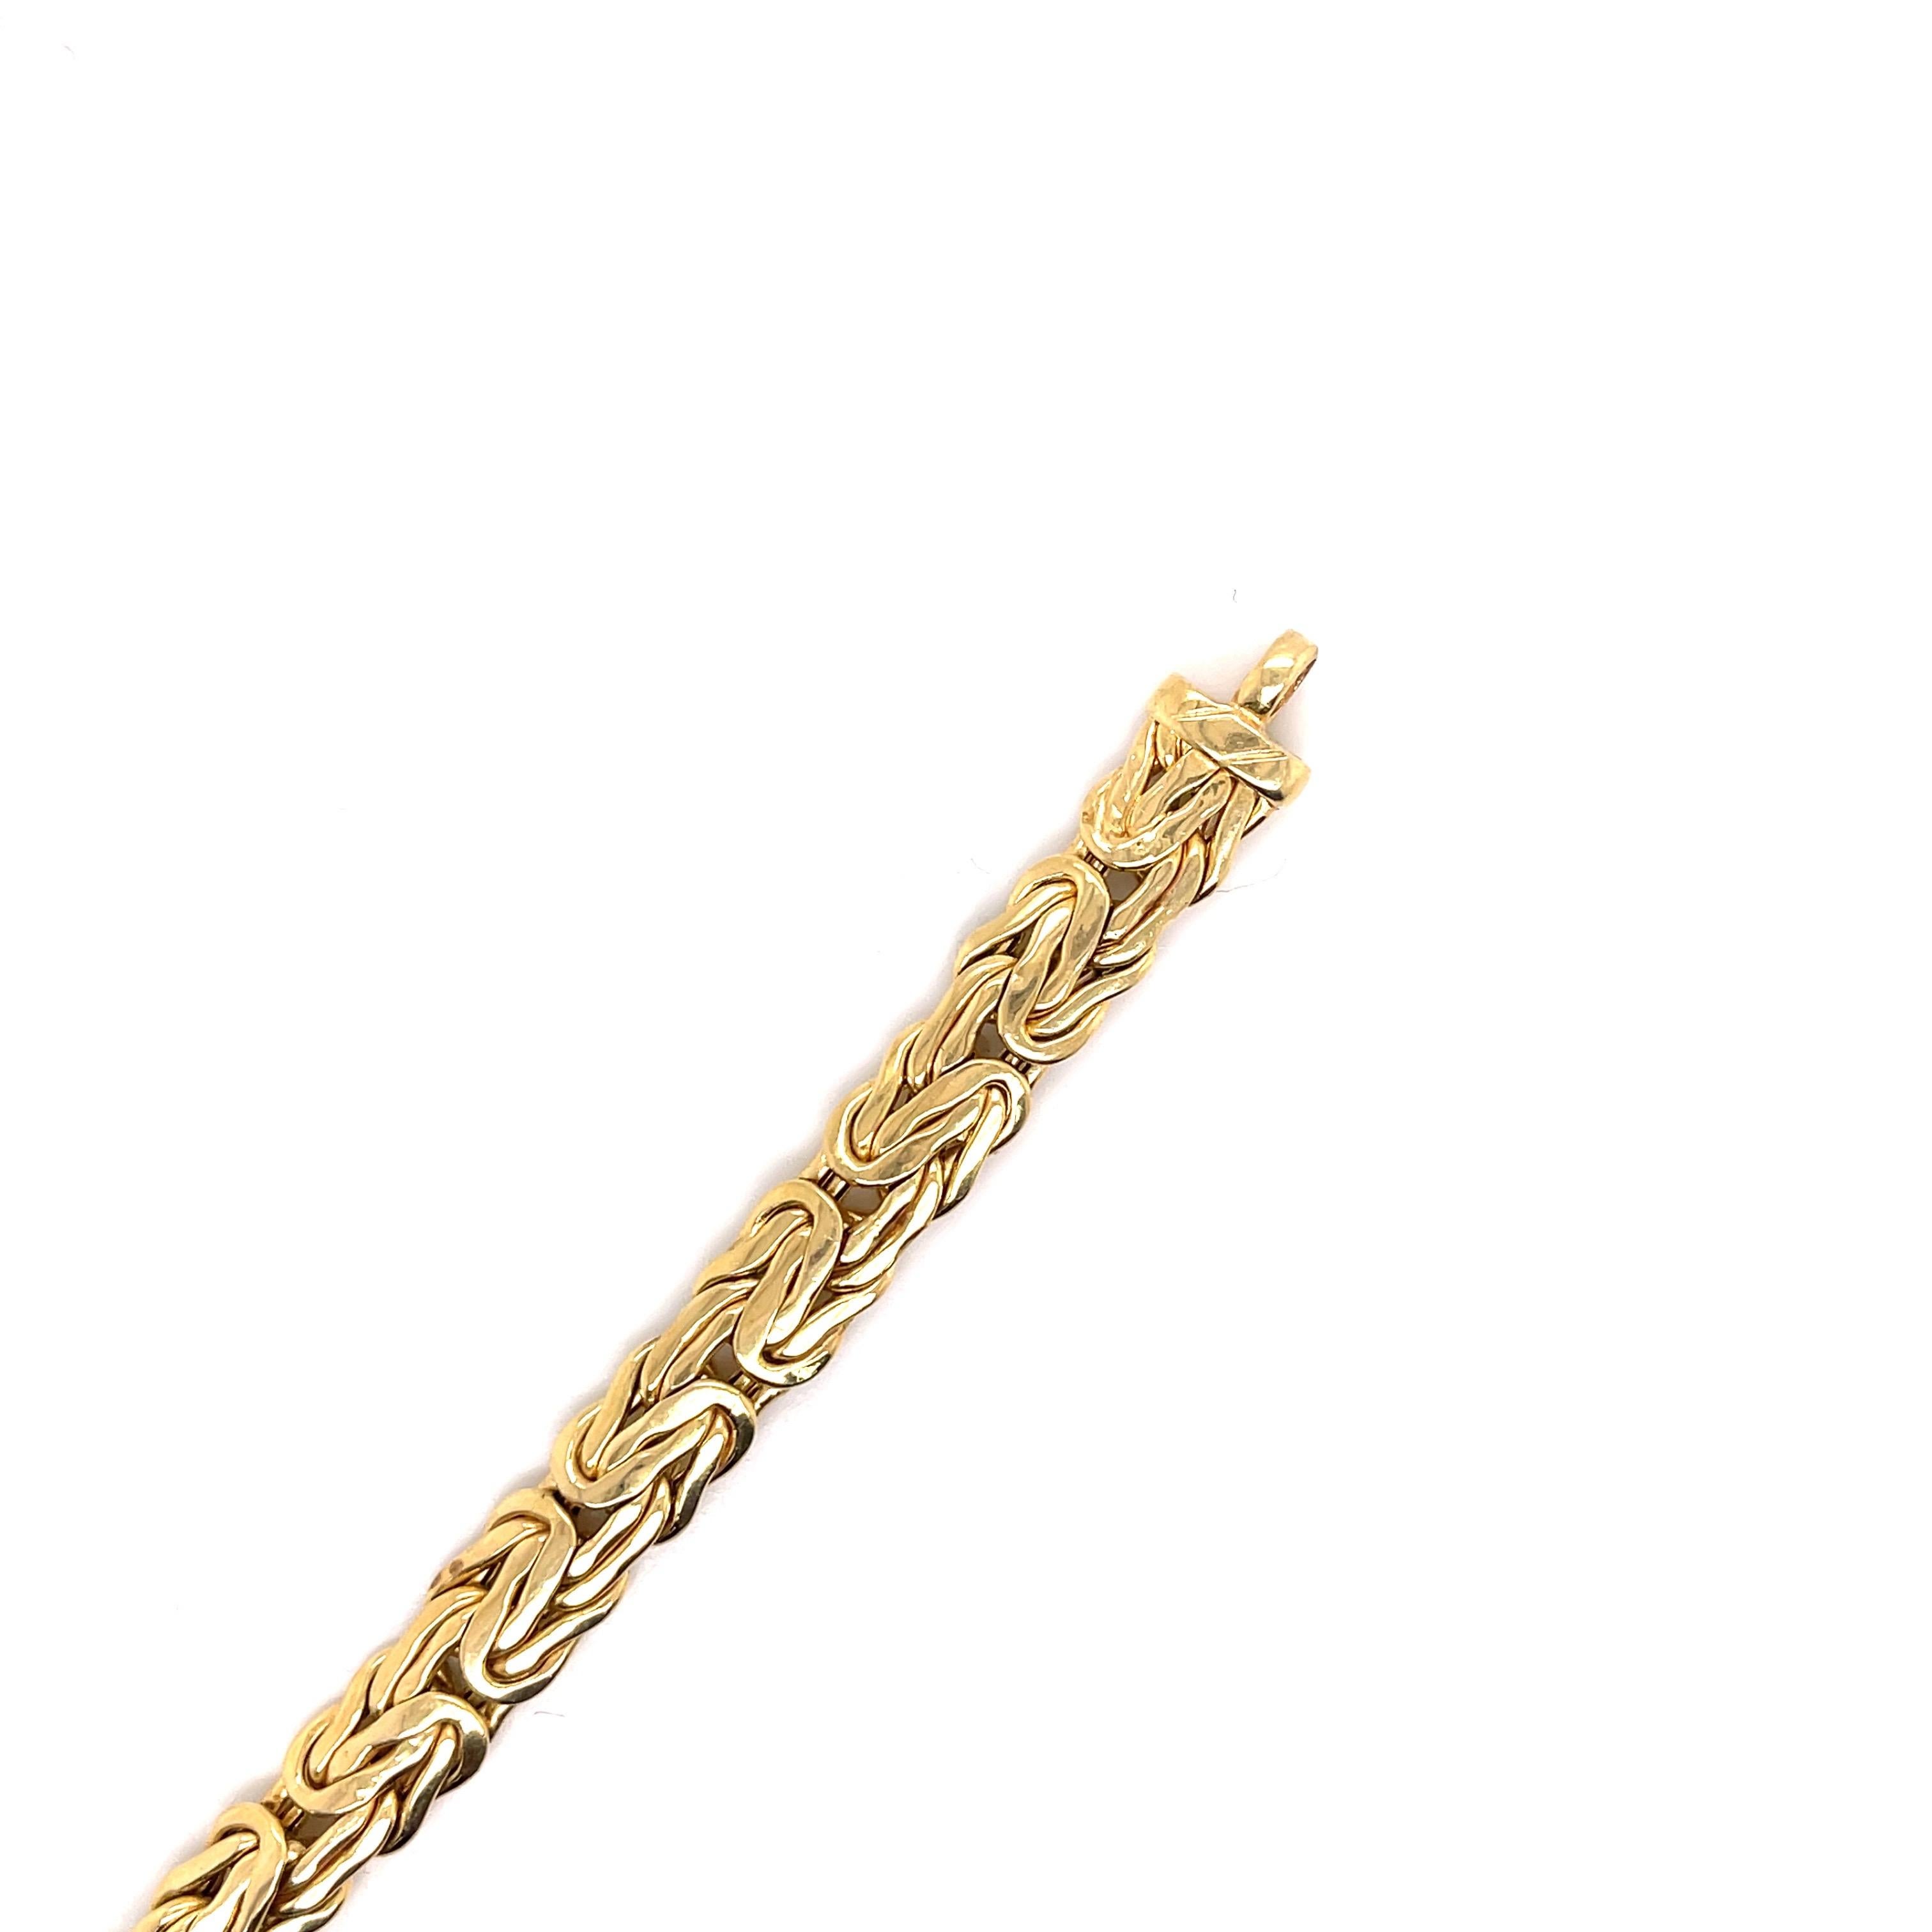 Contemporary Interlocking Chain Gold Necklace 29 Inches 14 Karat Yellow Gold 54 Grams For Sale